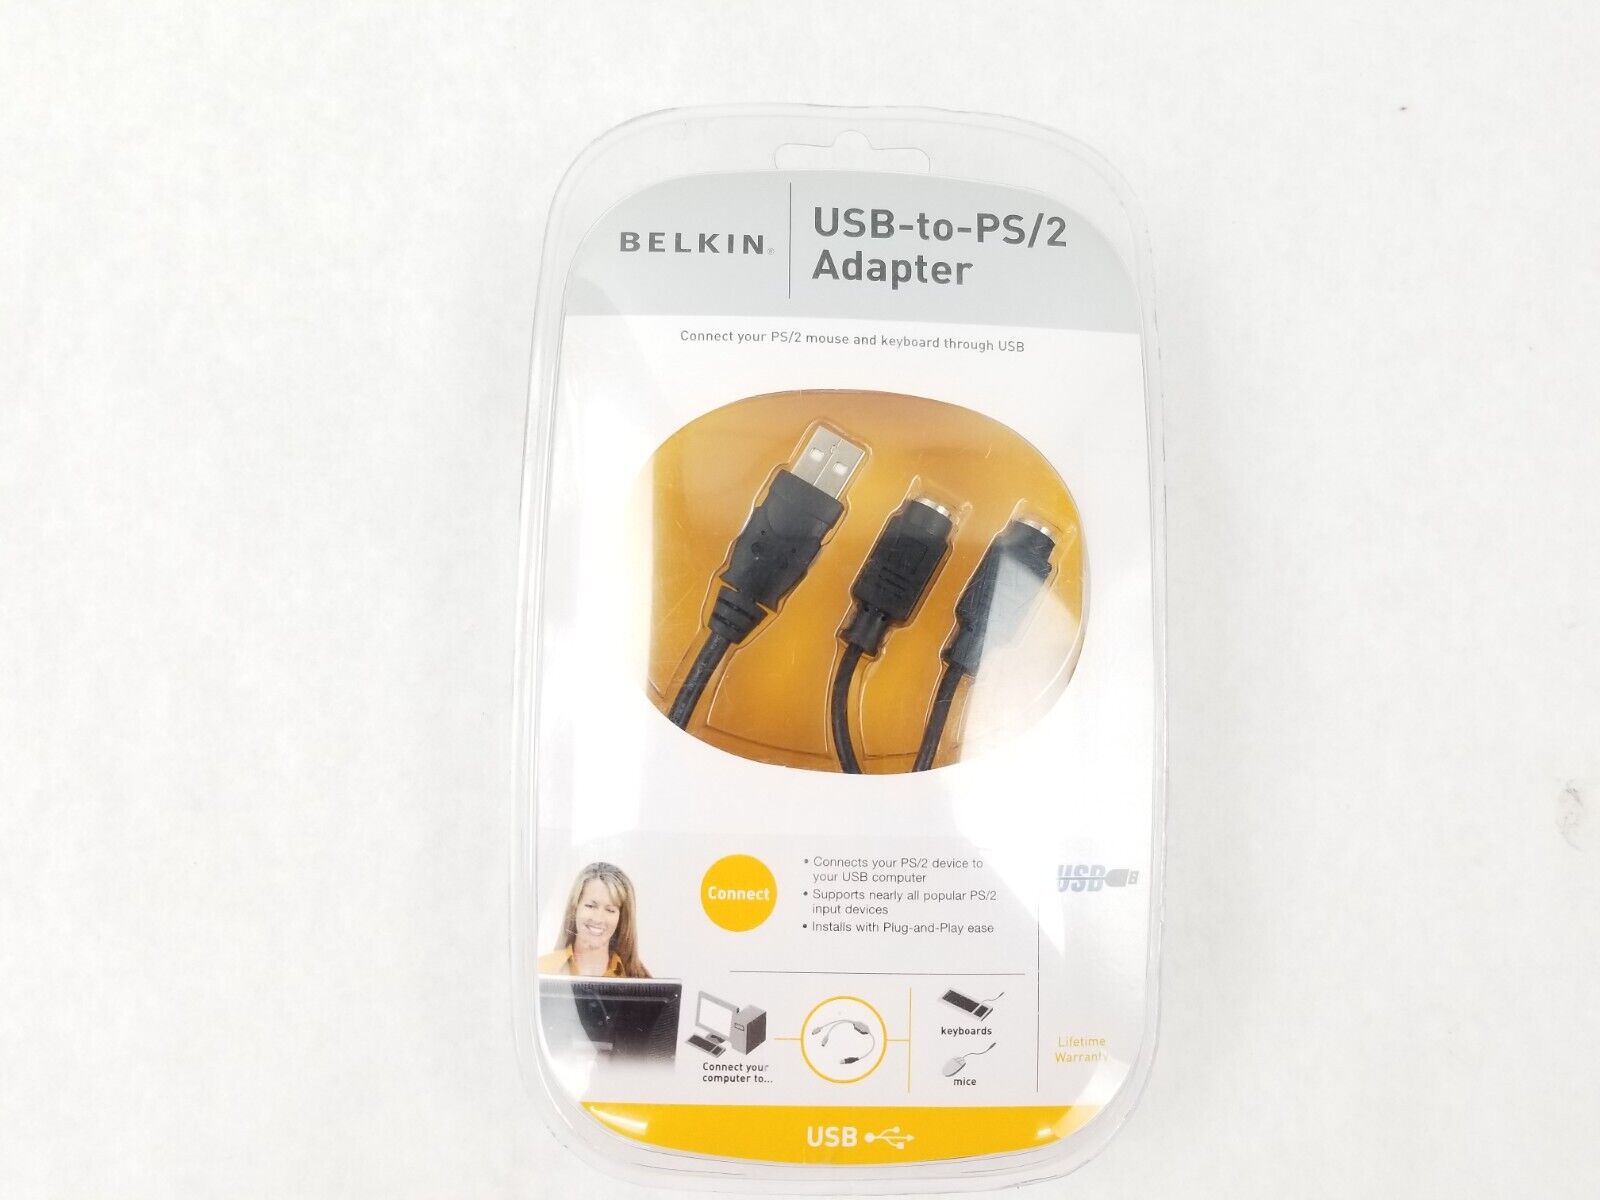 Belkin USB-to-PS/2 Adapter Connect PS/2 Mouse & Keyboard through USB NEW SEALED